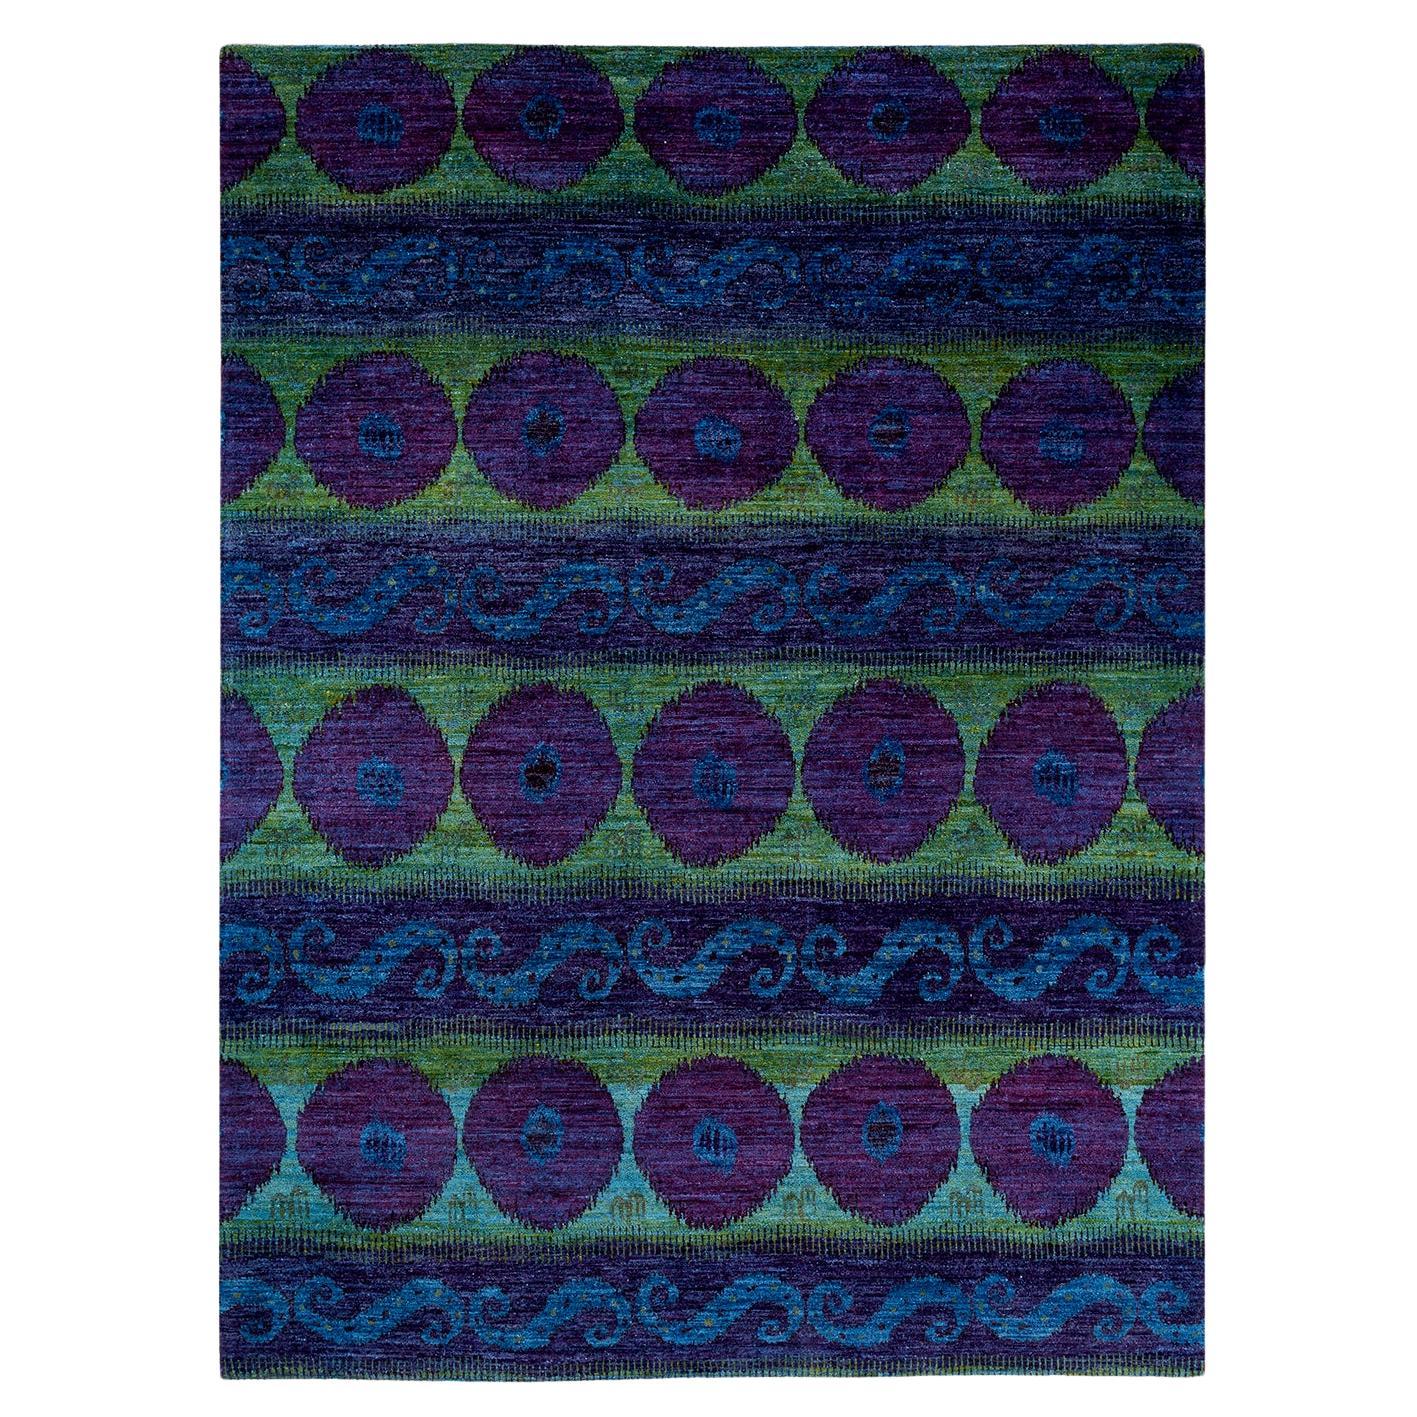 One of a Kind Hand Knotted Contemporary Overdyed Purple Area Rug